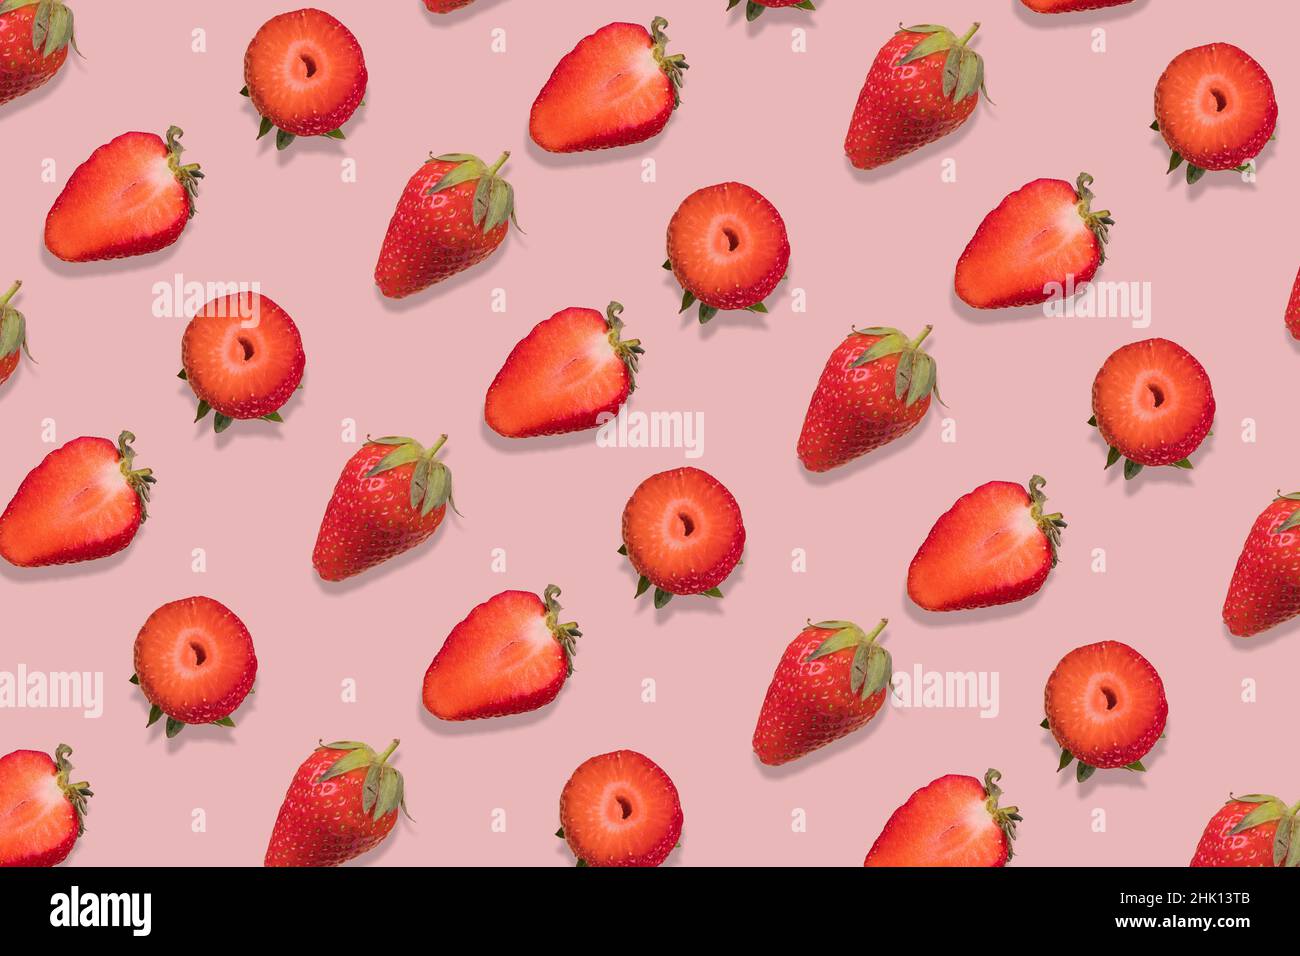 Strawberry pattern on a pastel pink background, creative flat lay healthy food concept, top view. Stock Photo